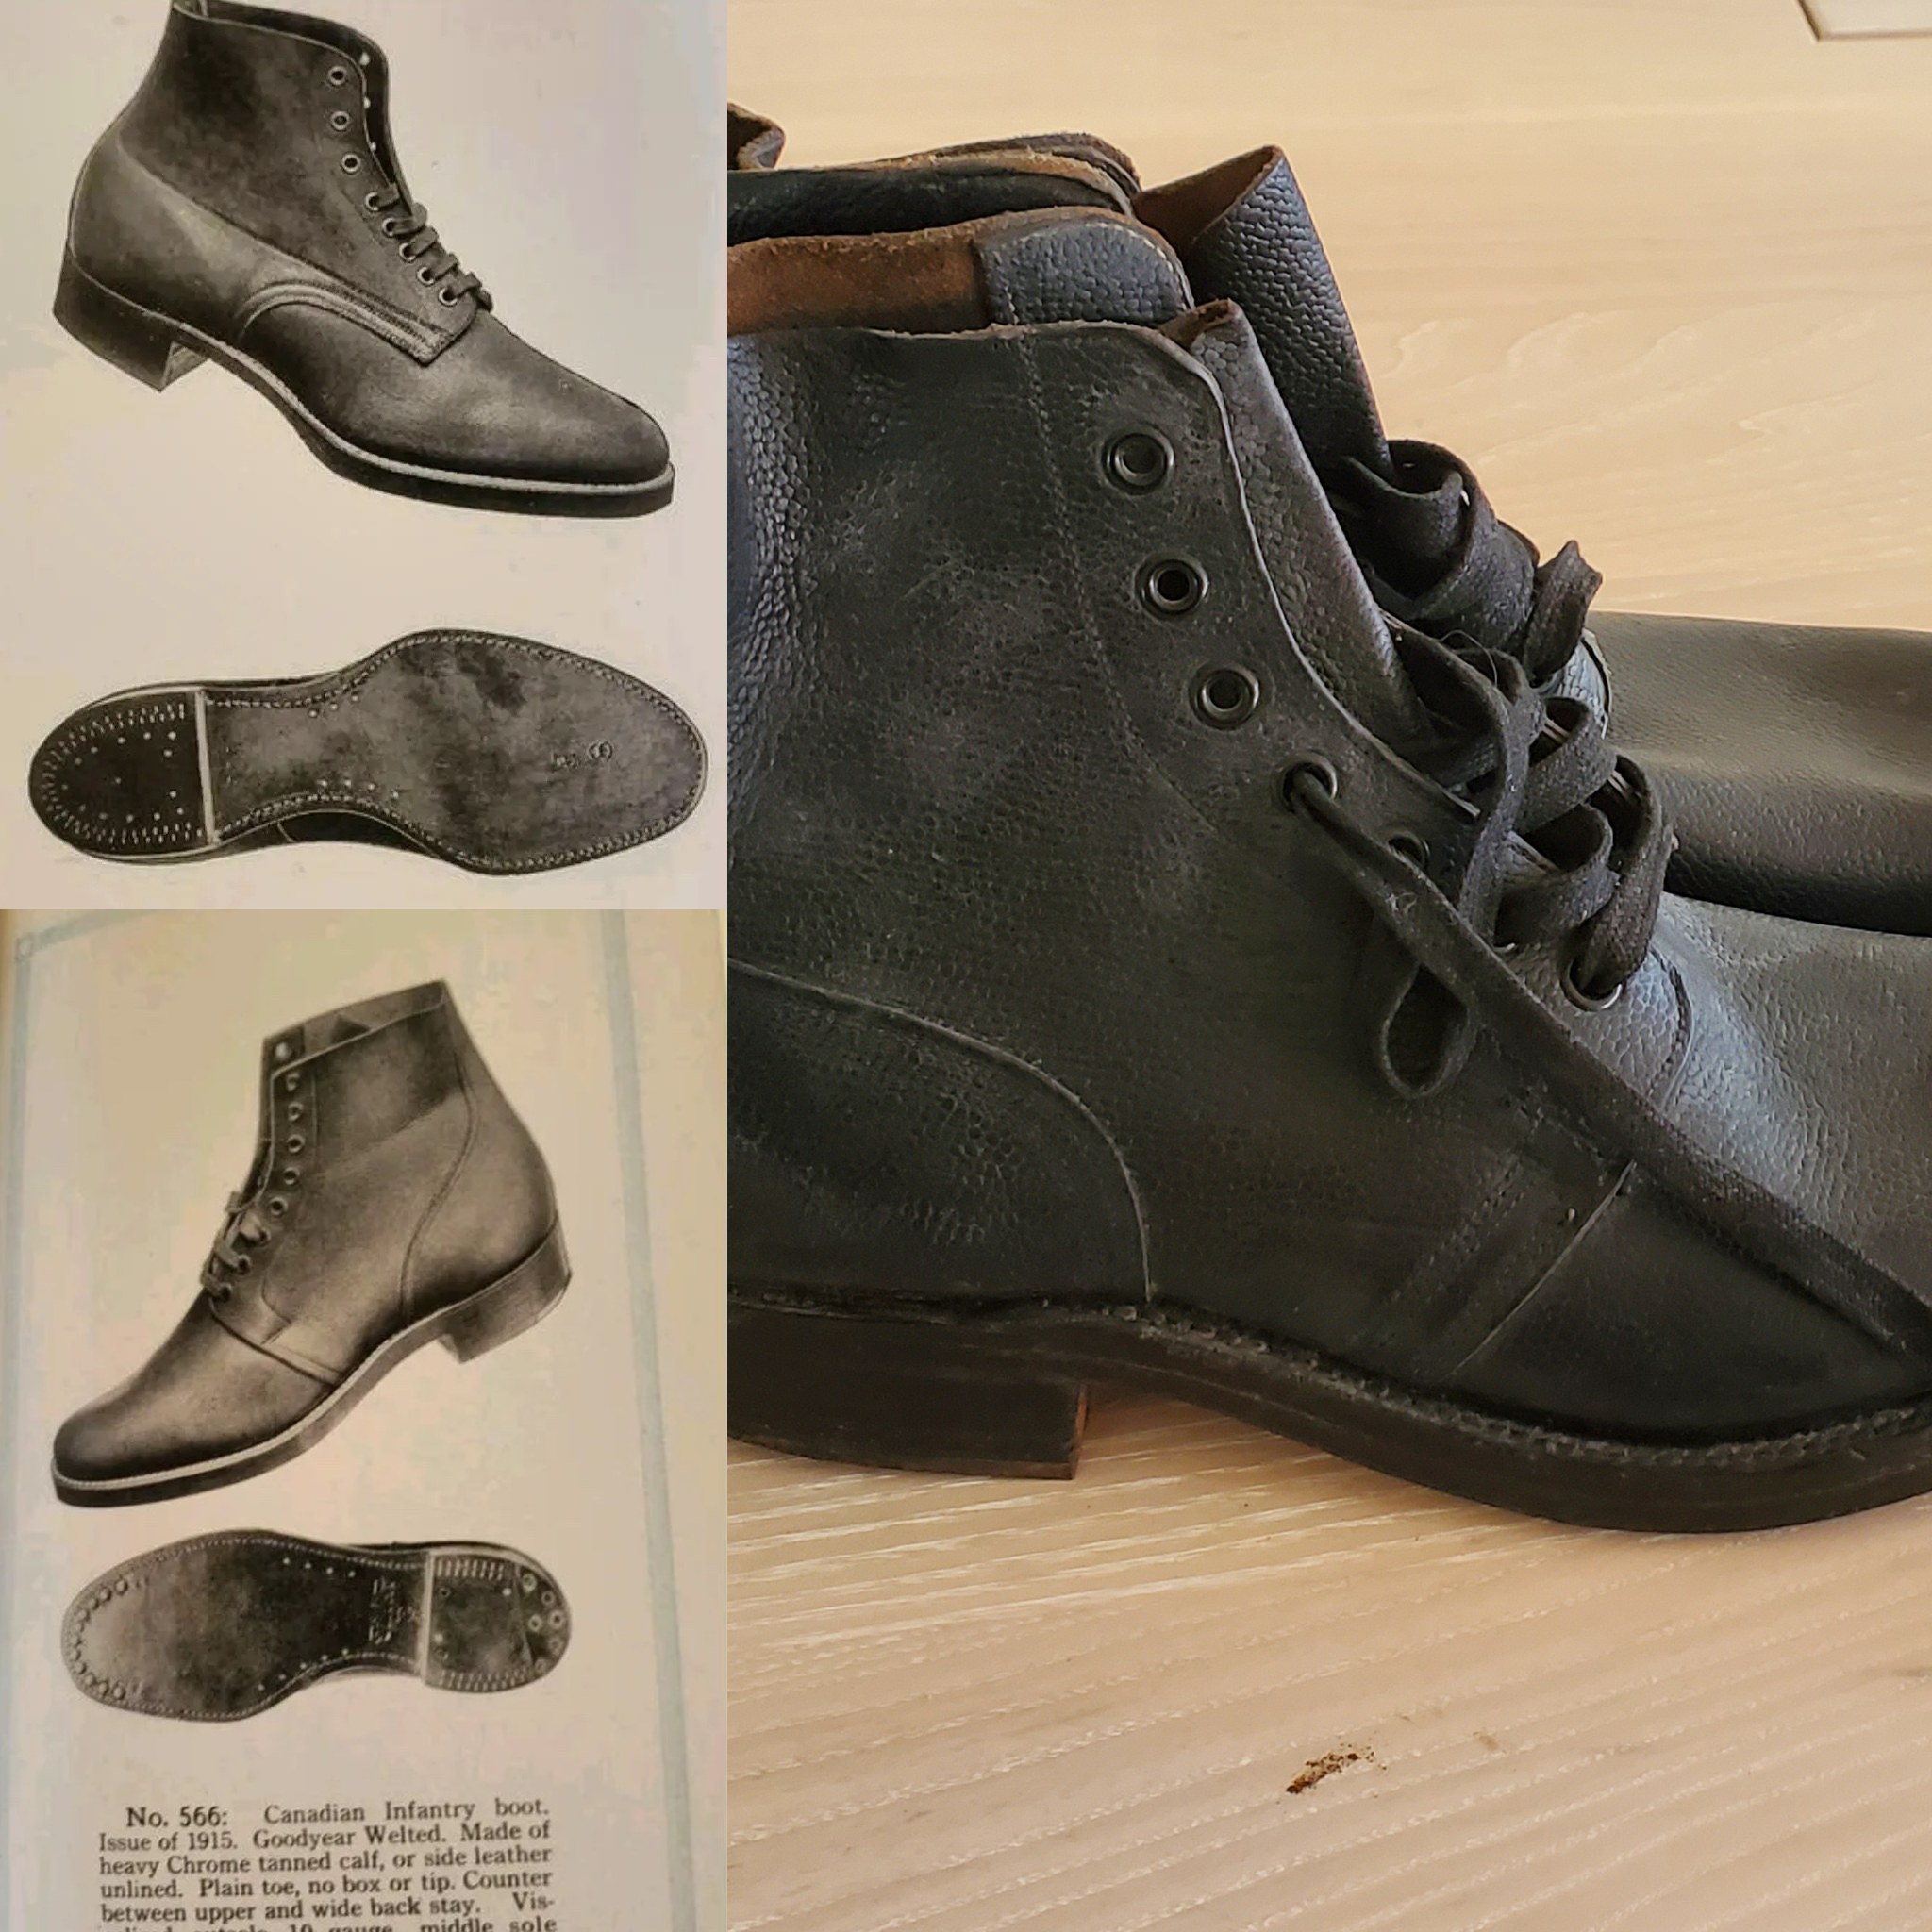 Vintage catalog, and vintage boots used to model the 1915 Canadian Infantry Boot